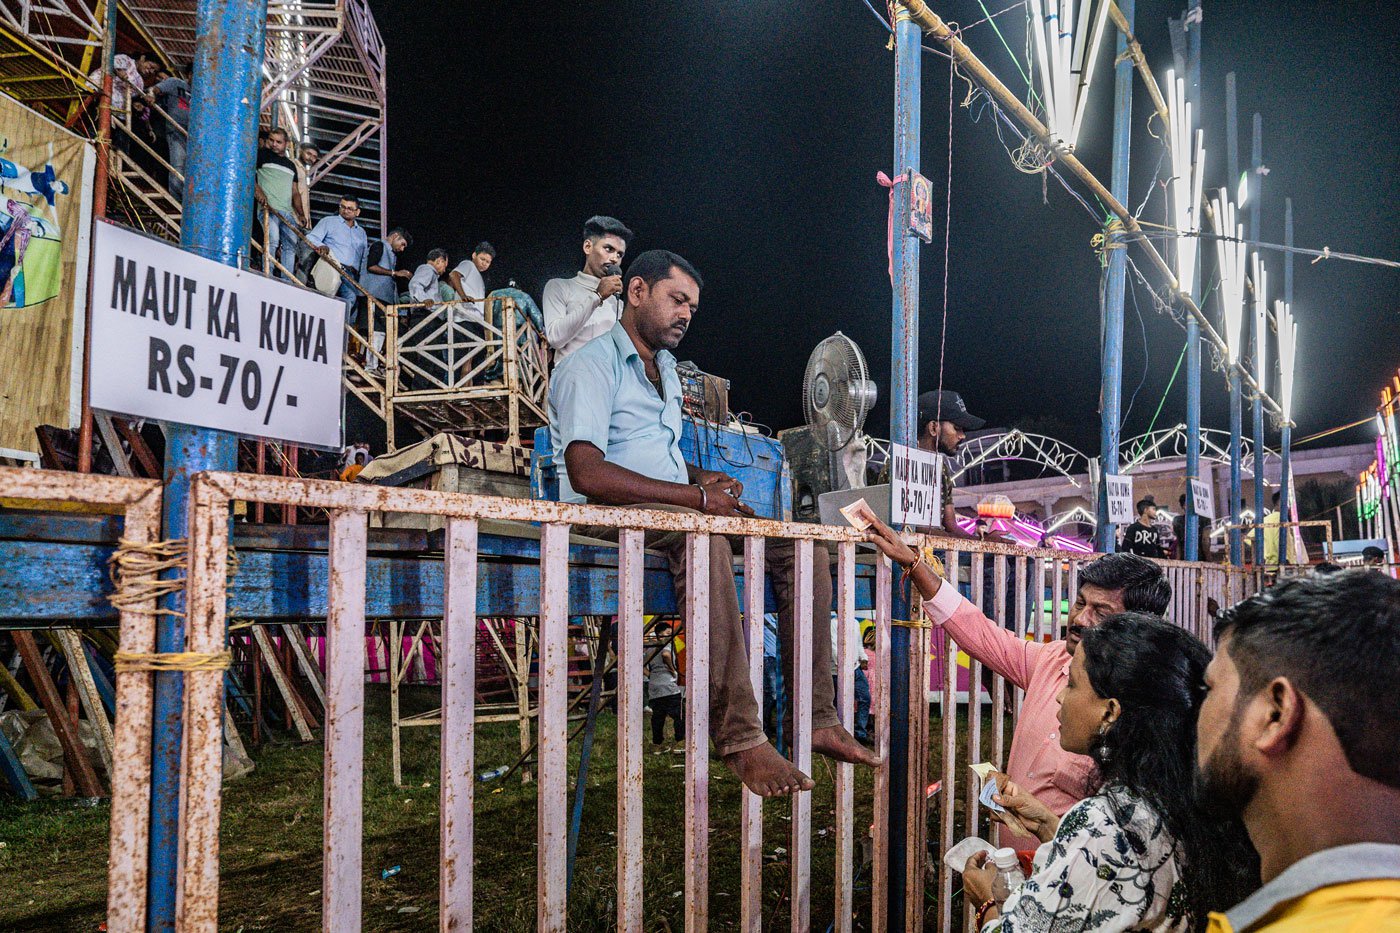 Maut-ka-kuan tickets sell for RS.70-80, which they decide depending on the crowd, but children are allowed to attend for free